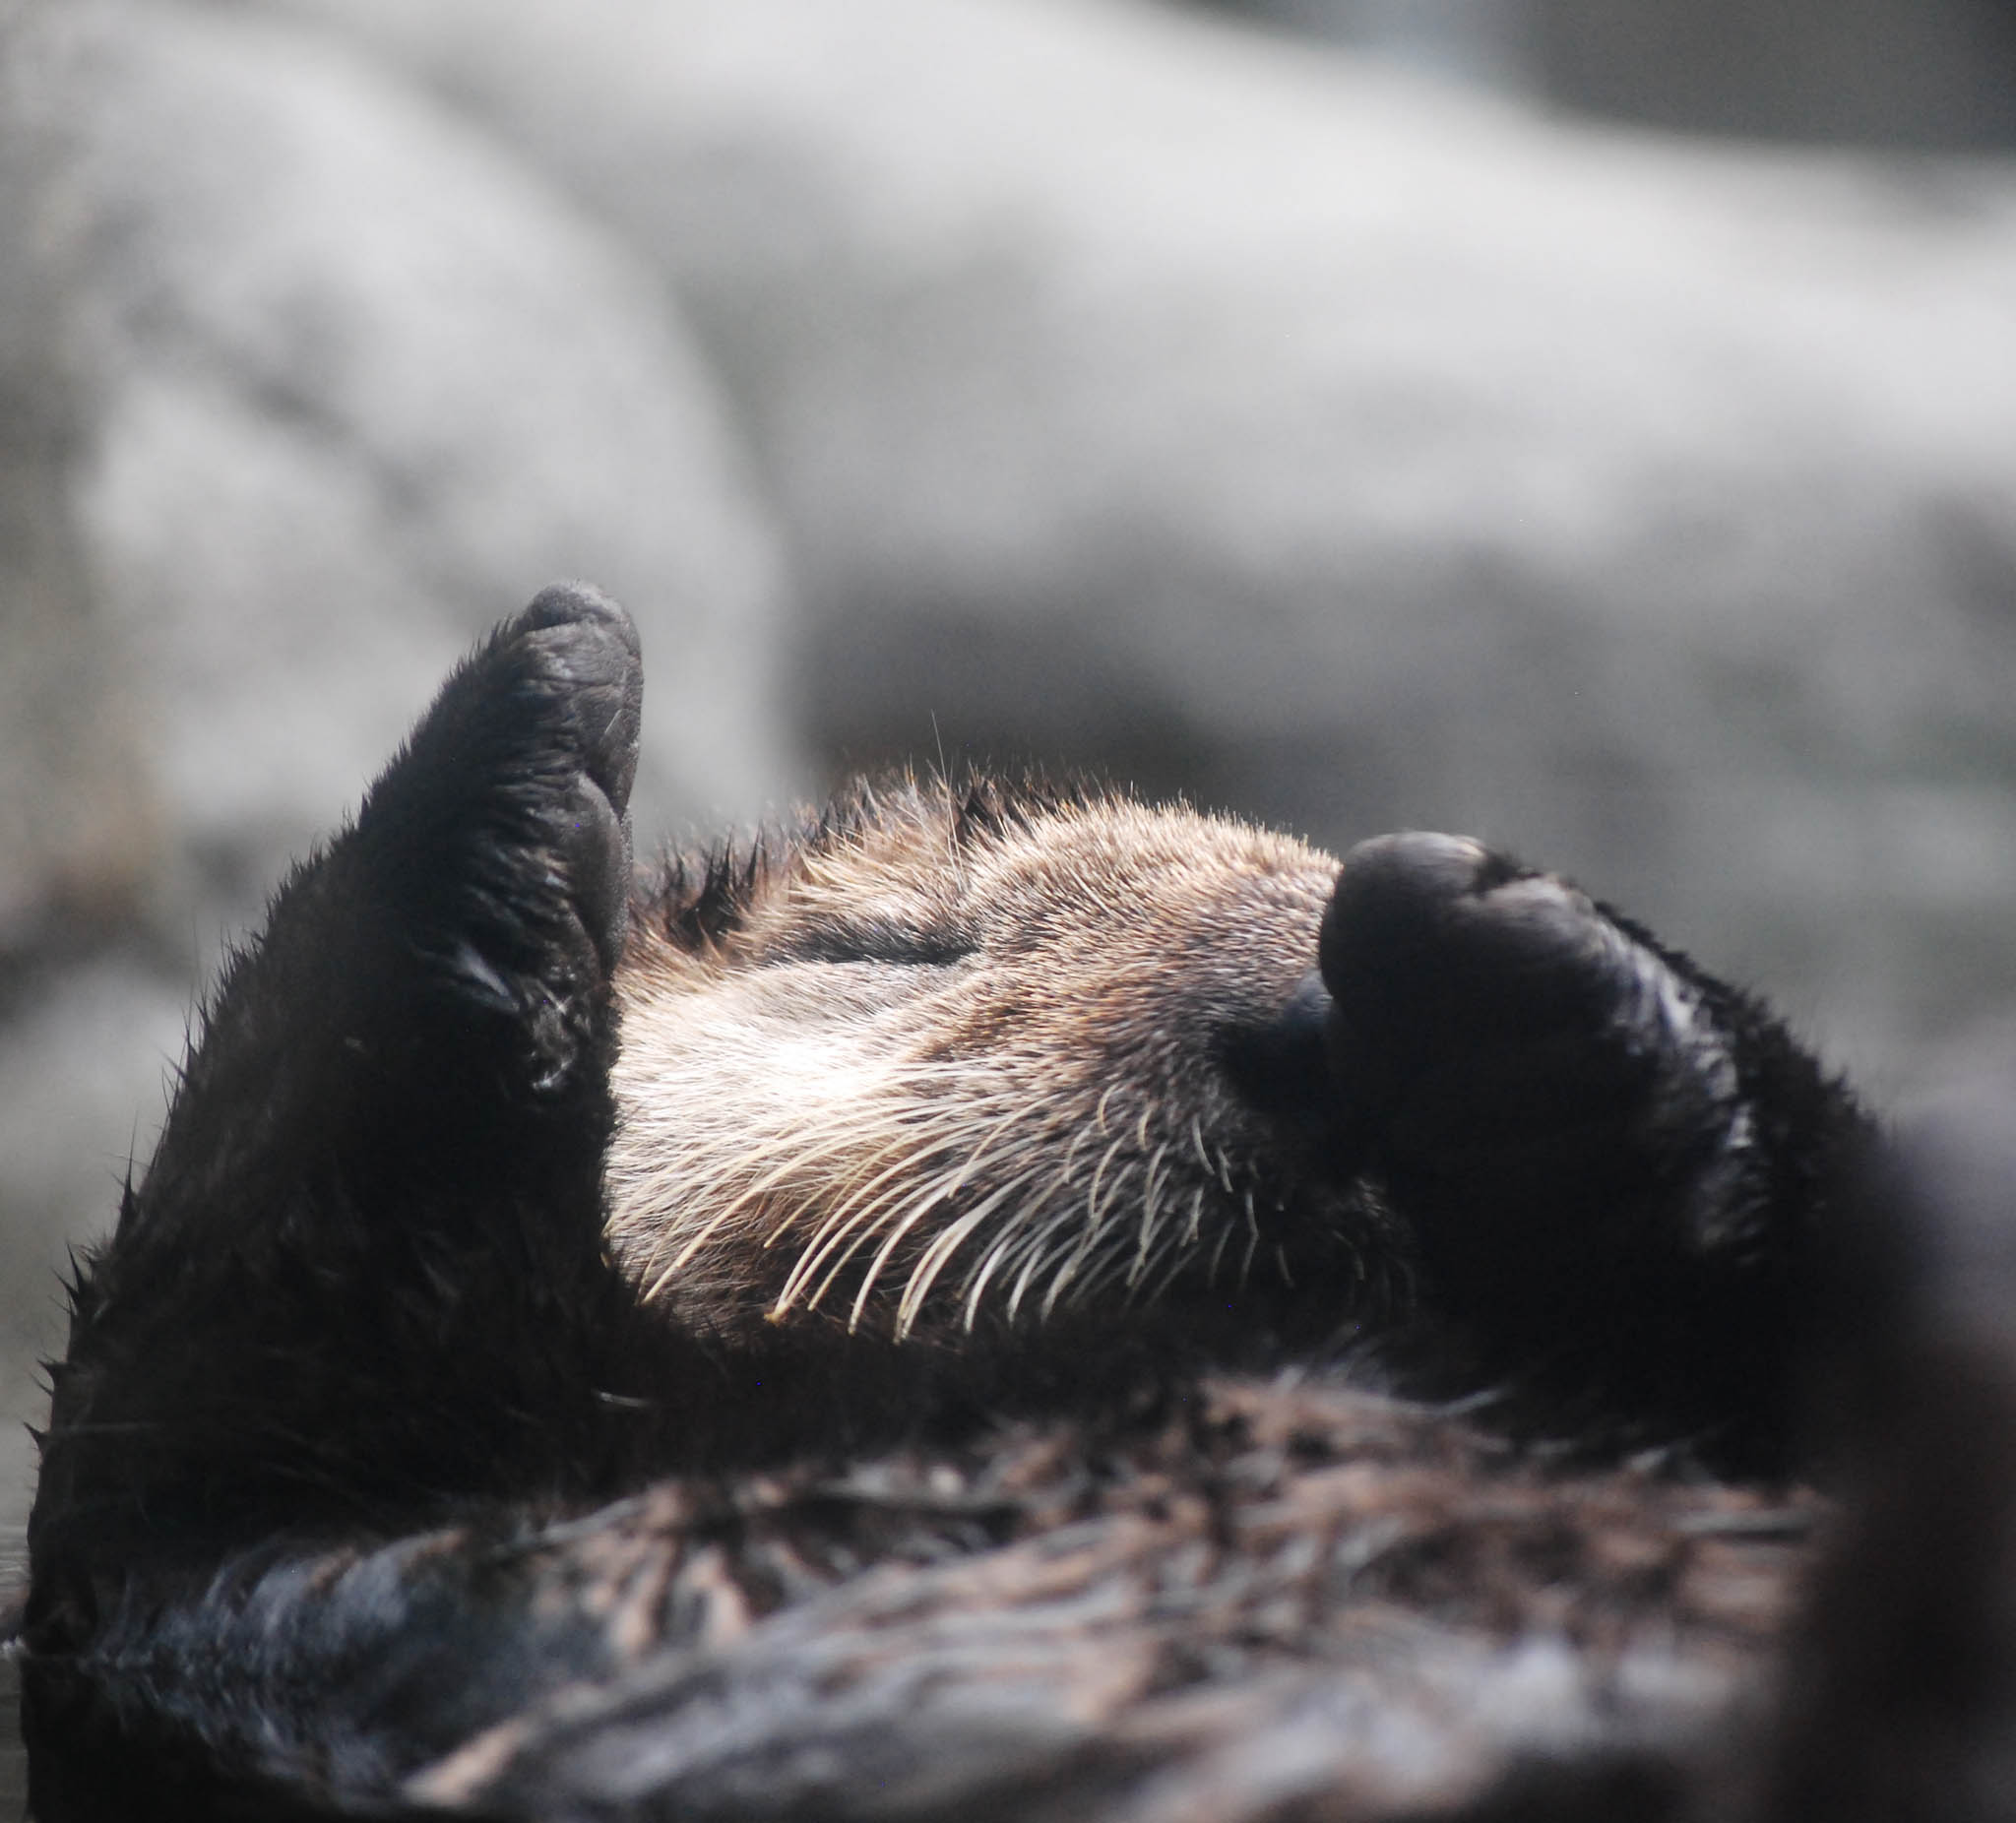 Sea Otter's Paws Stick Up When She Sleeps